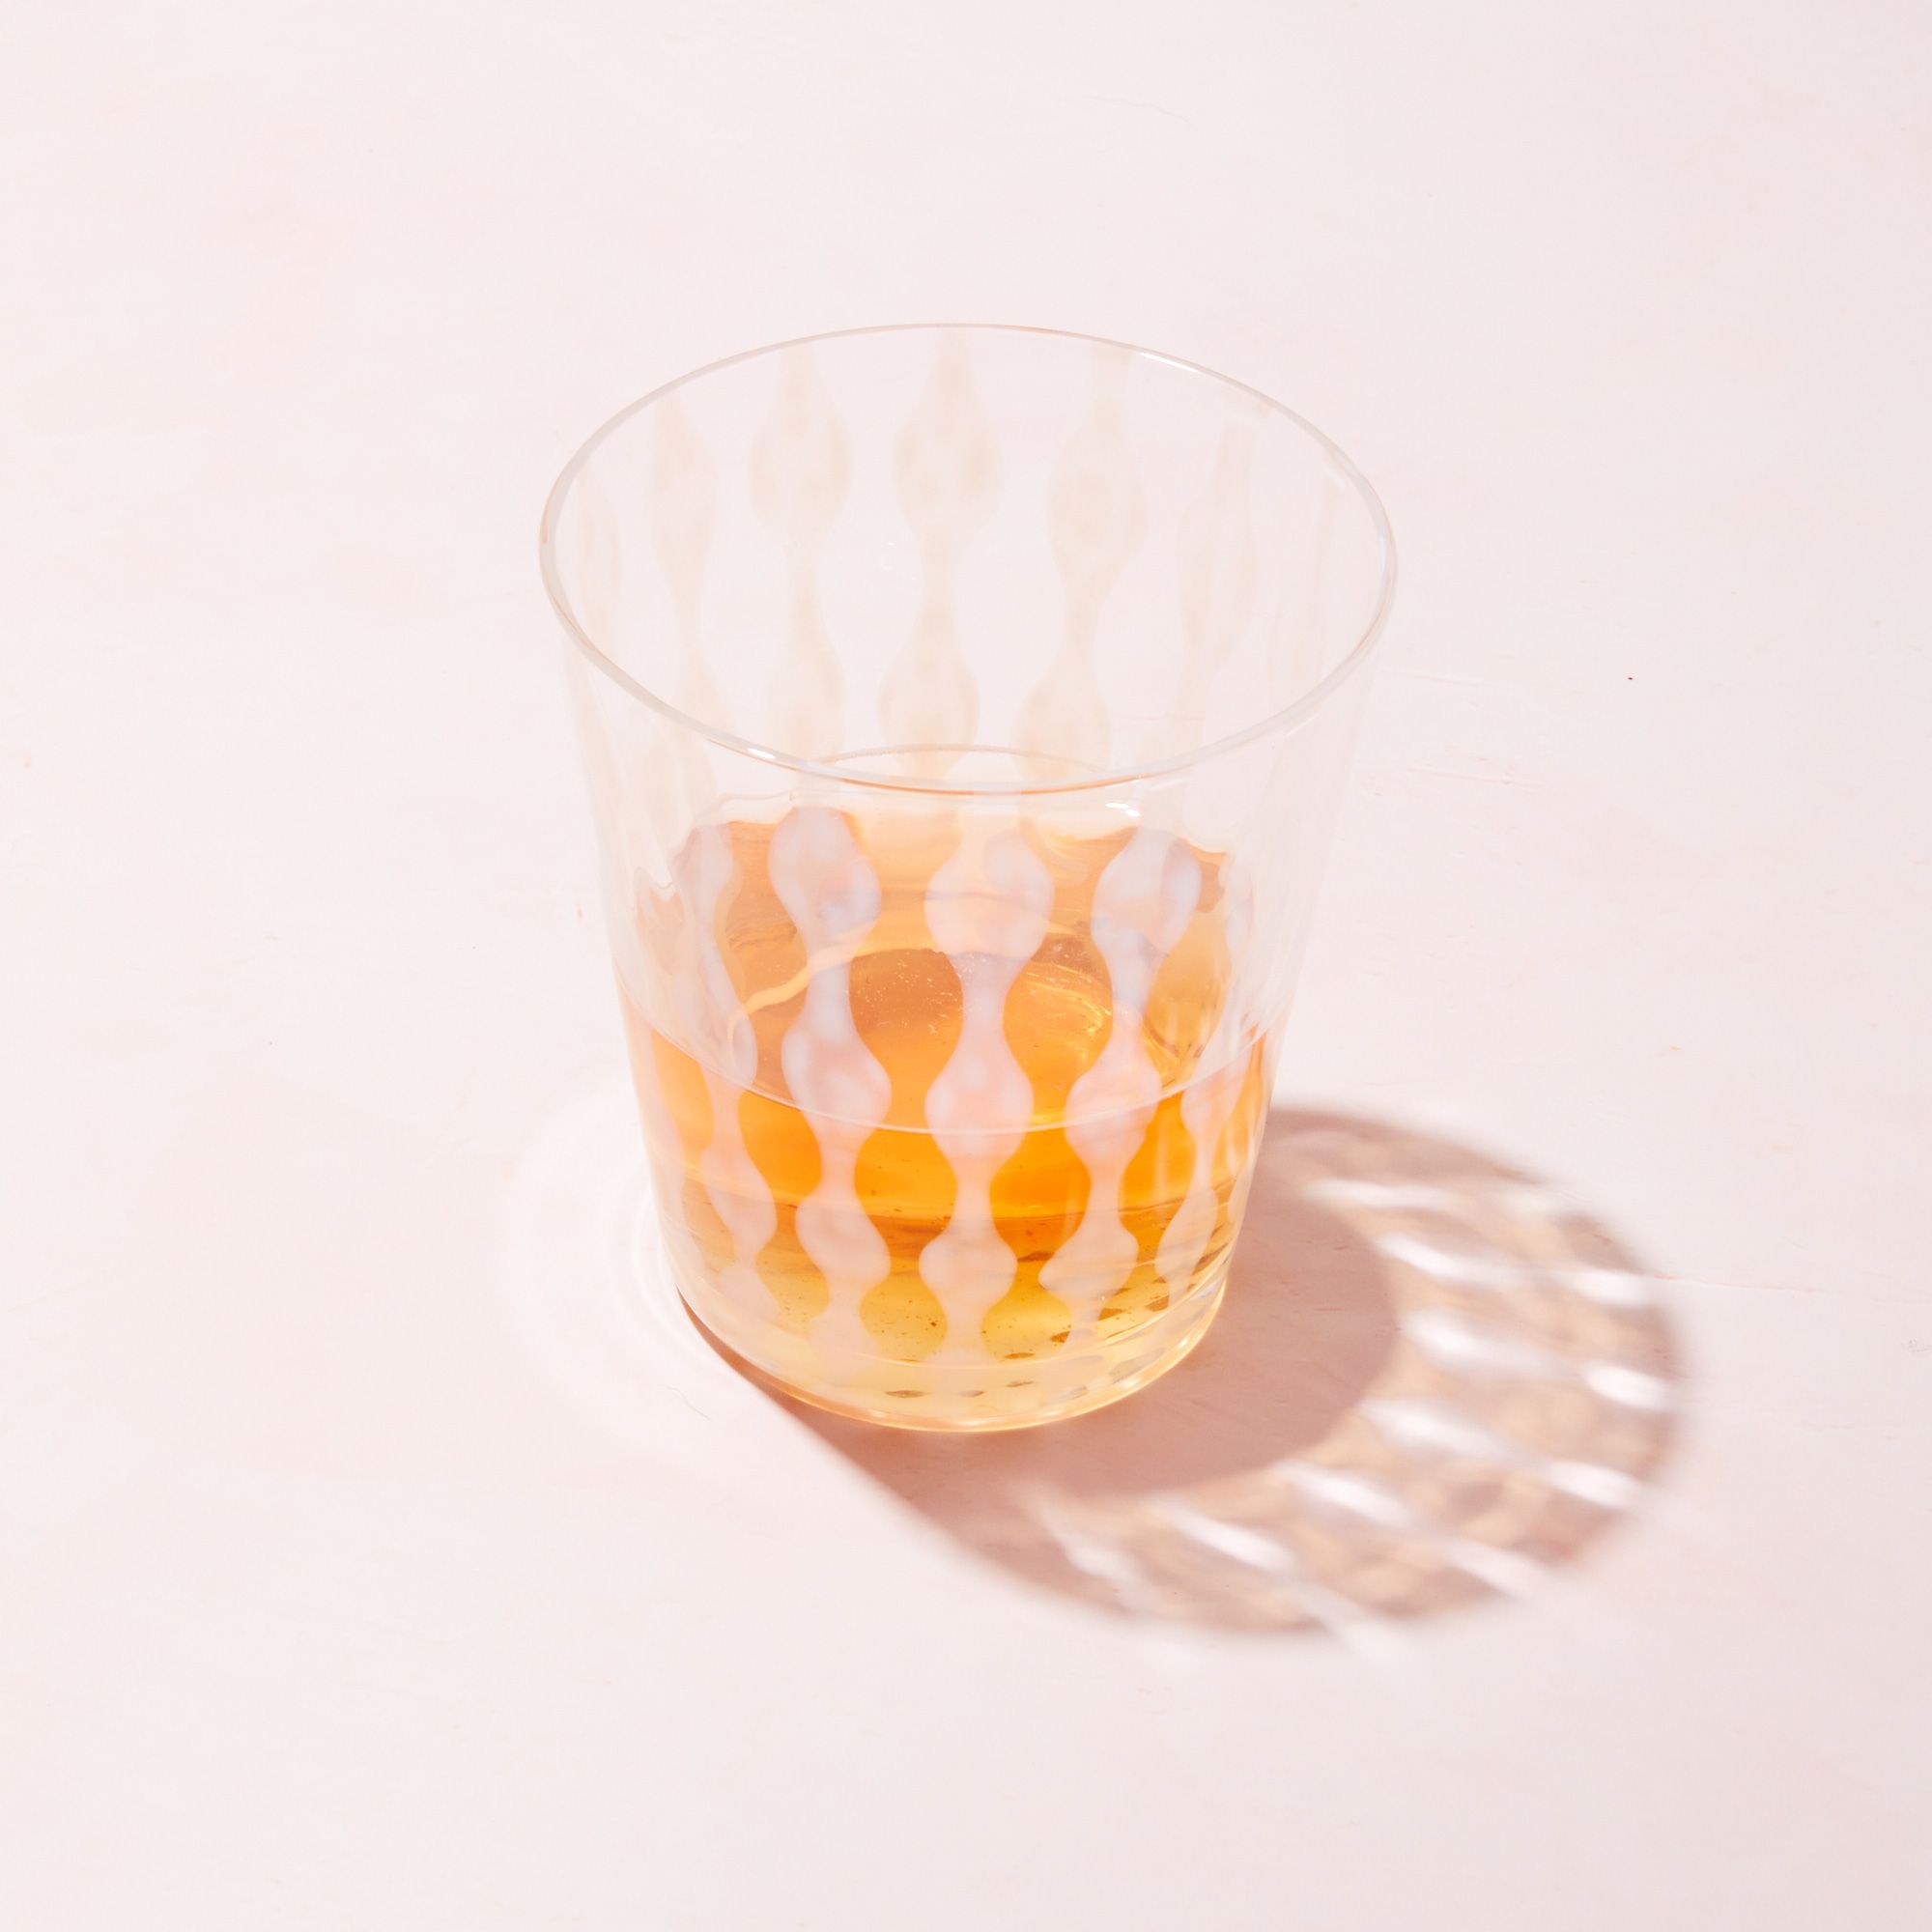 A short clear glass with a delicate vertical wave pattern, half filled with a drink and casting a shadow